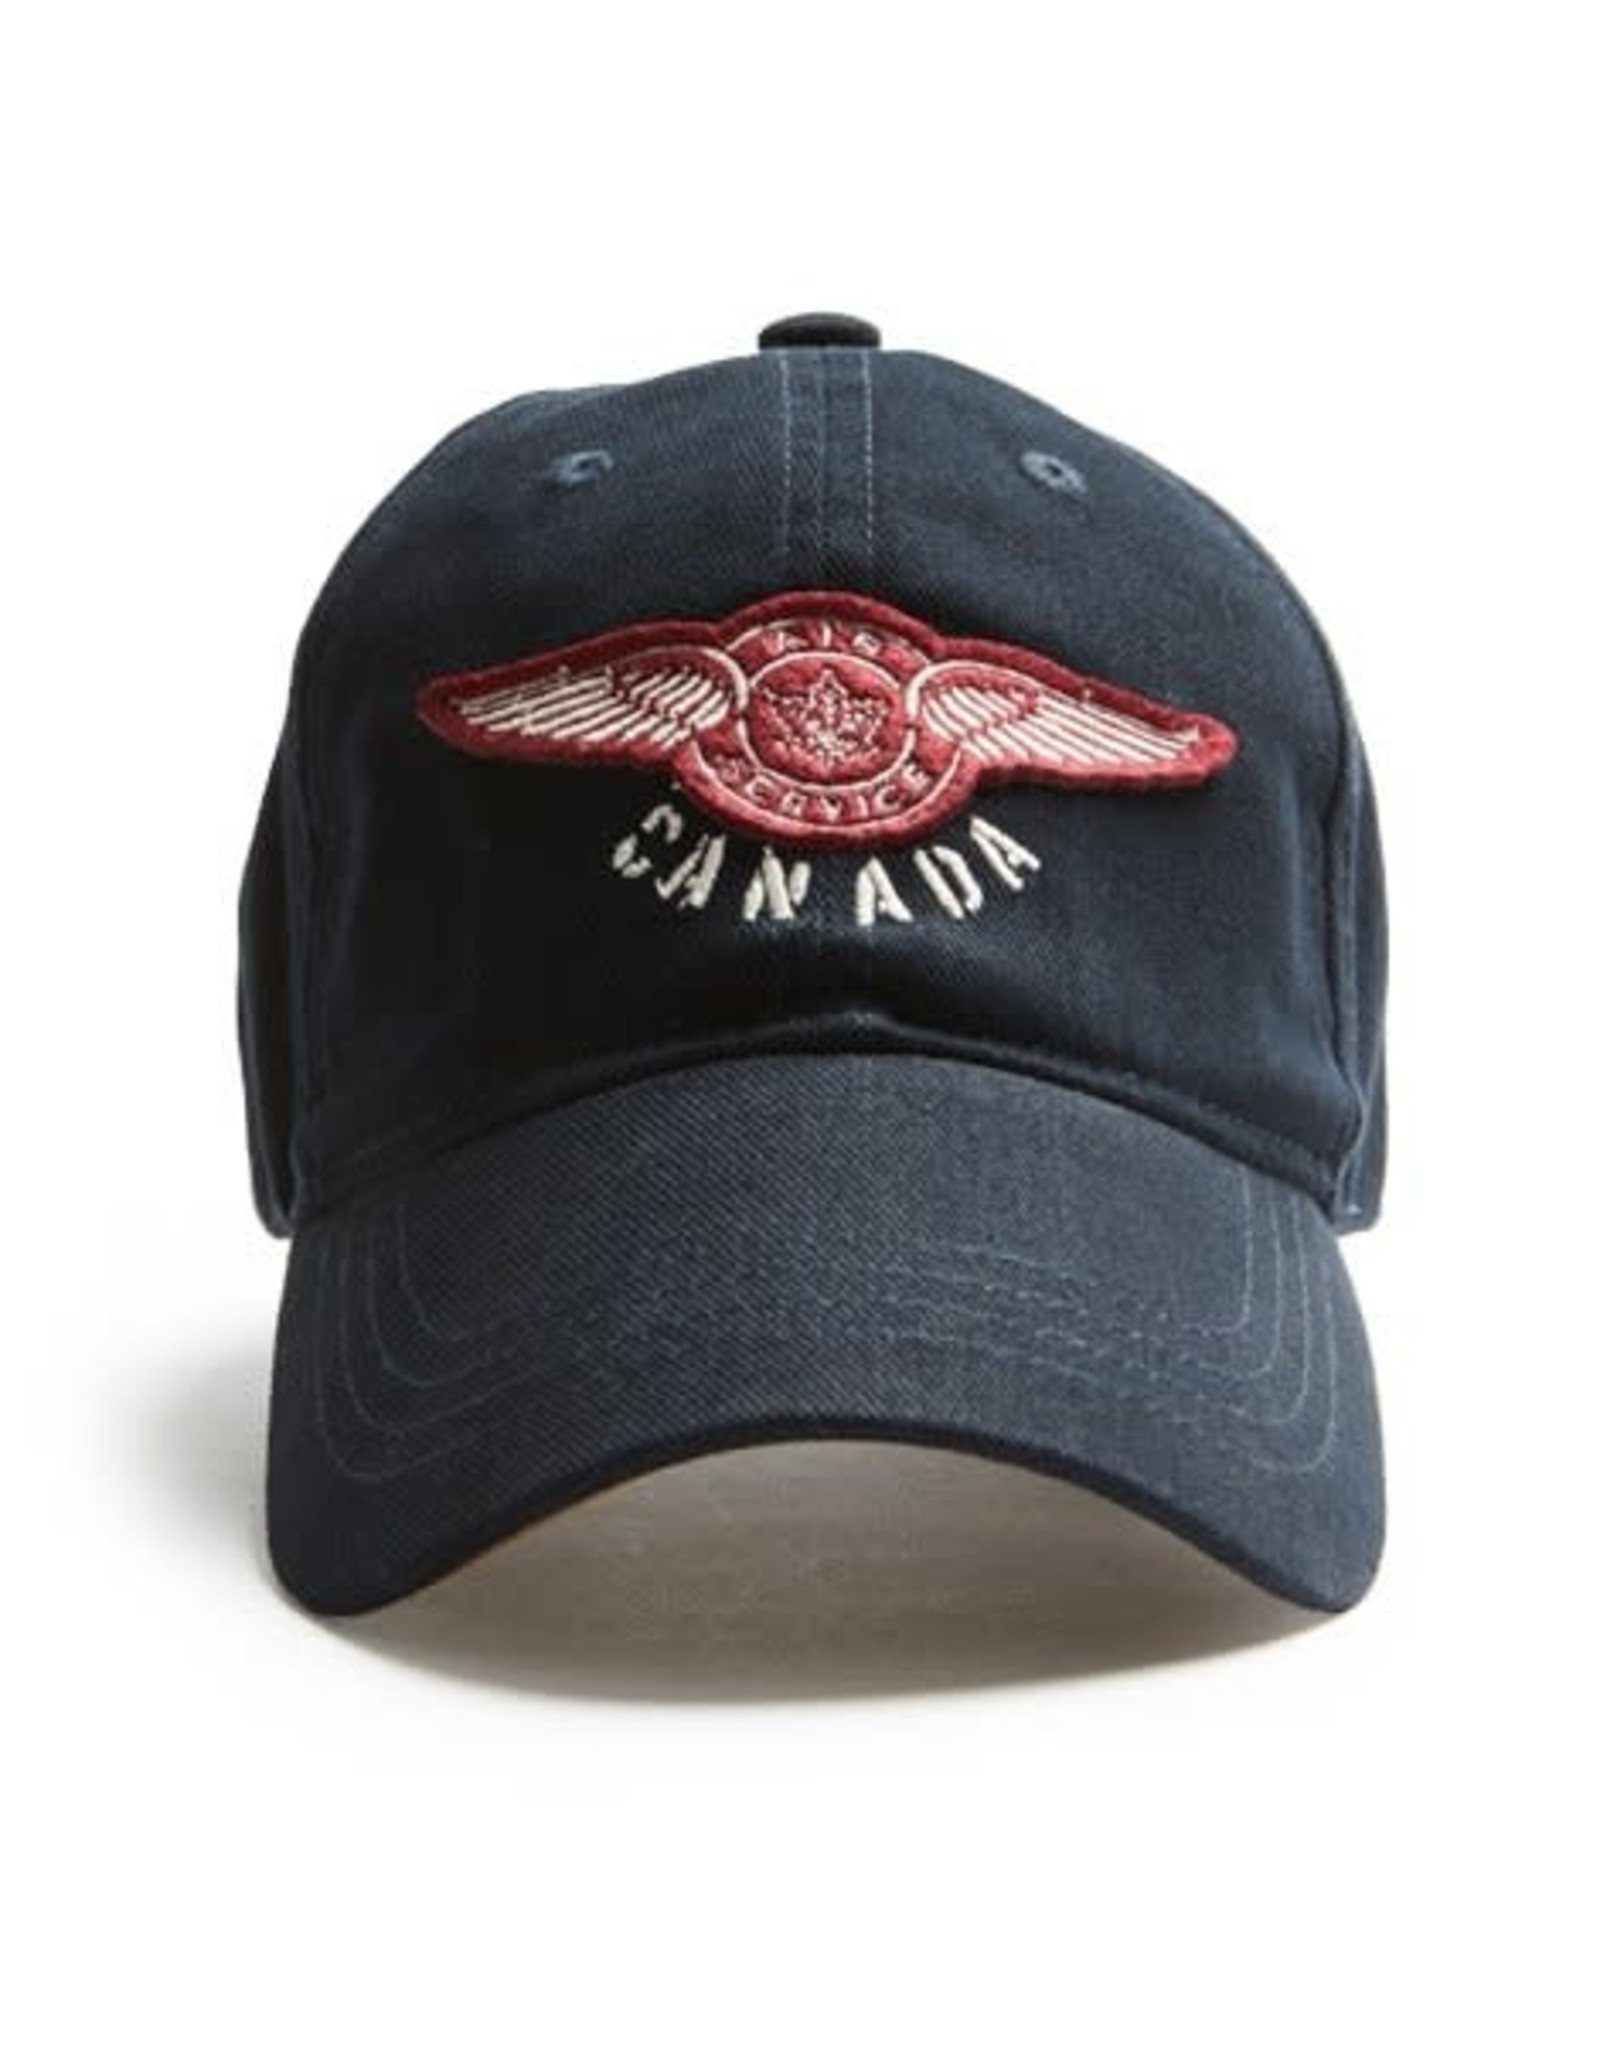 Navy Canada Air Service hat